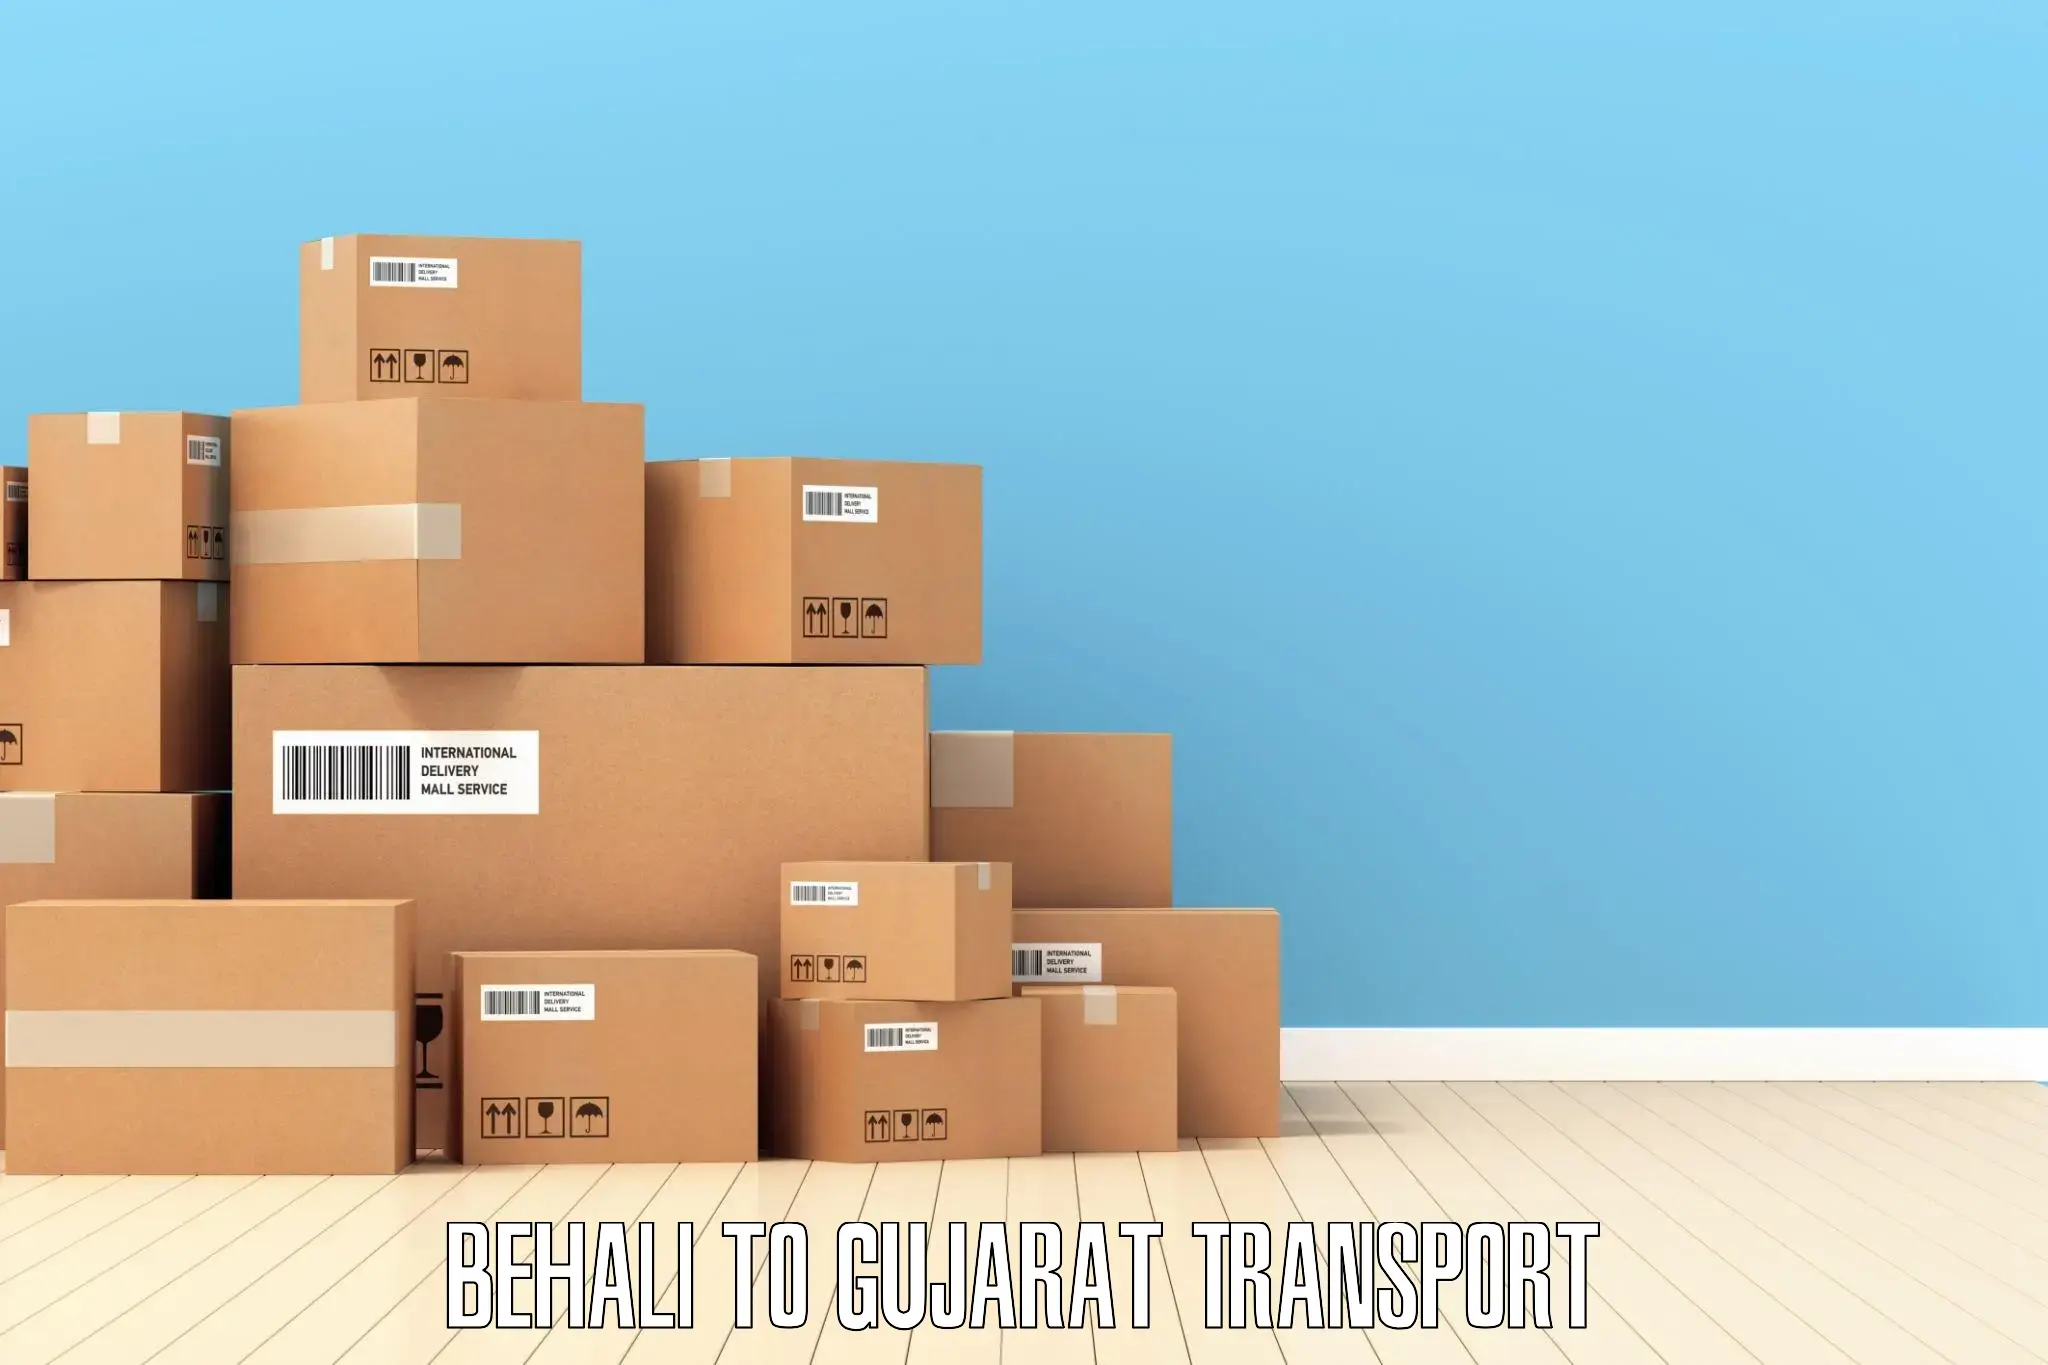 Commercial transport service Behali to Dhanera